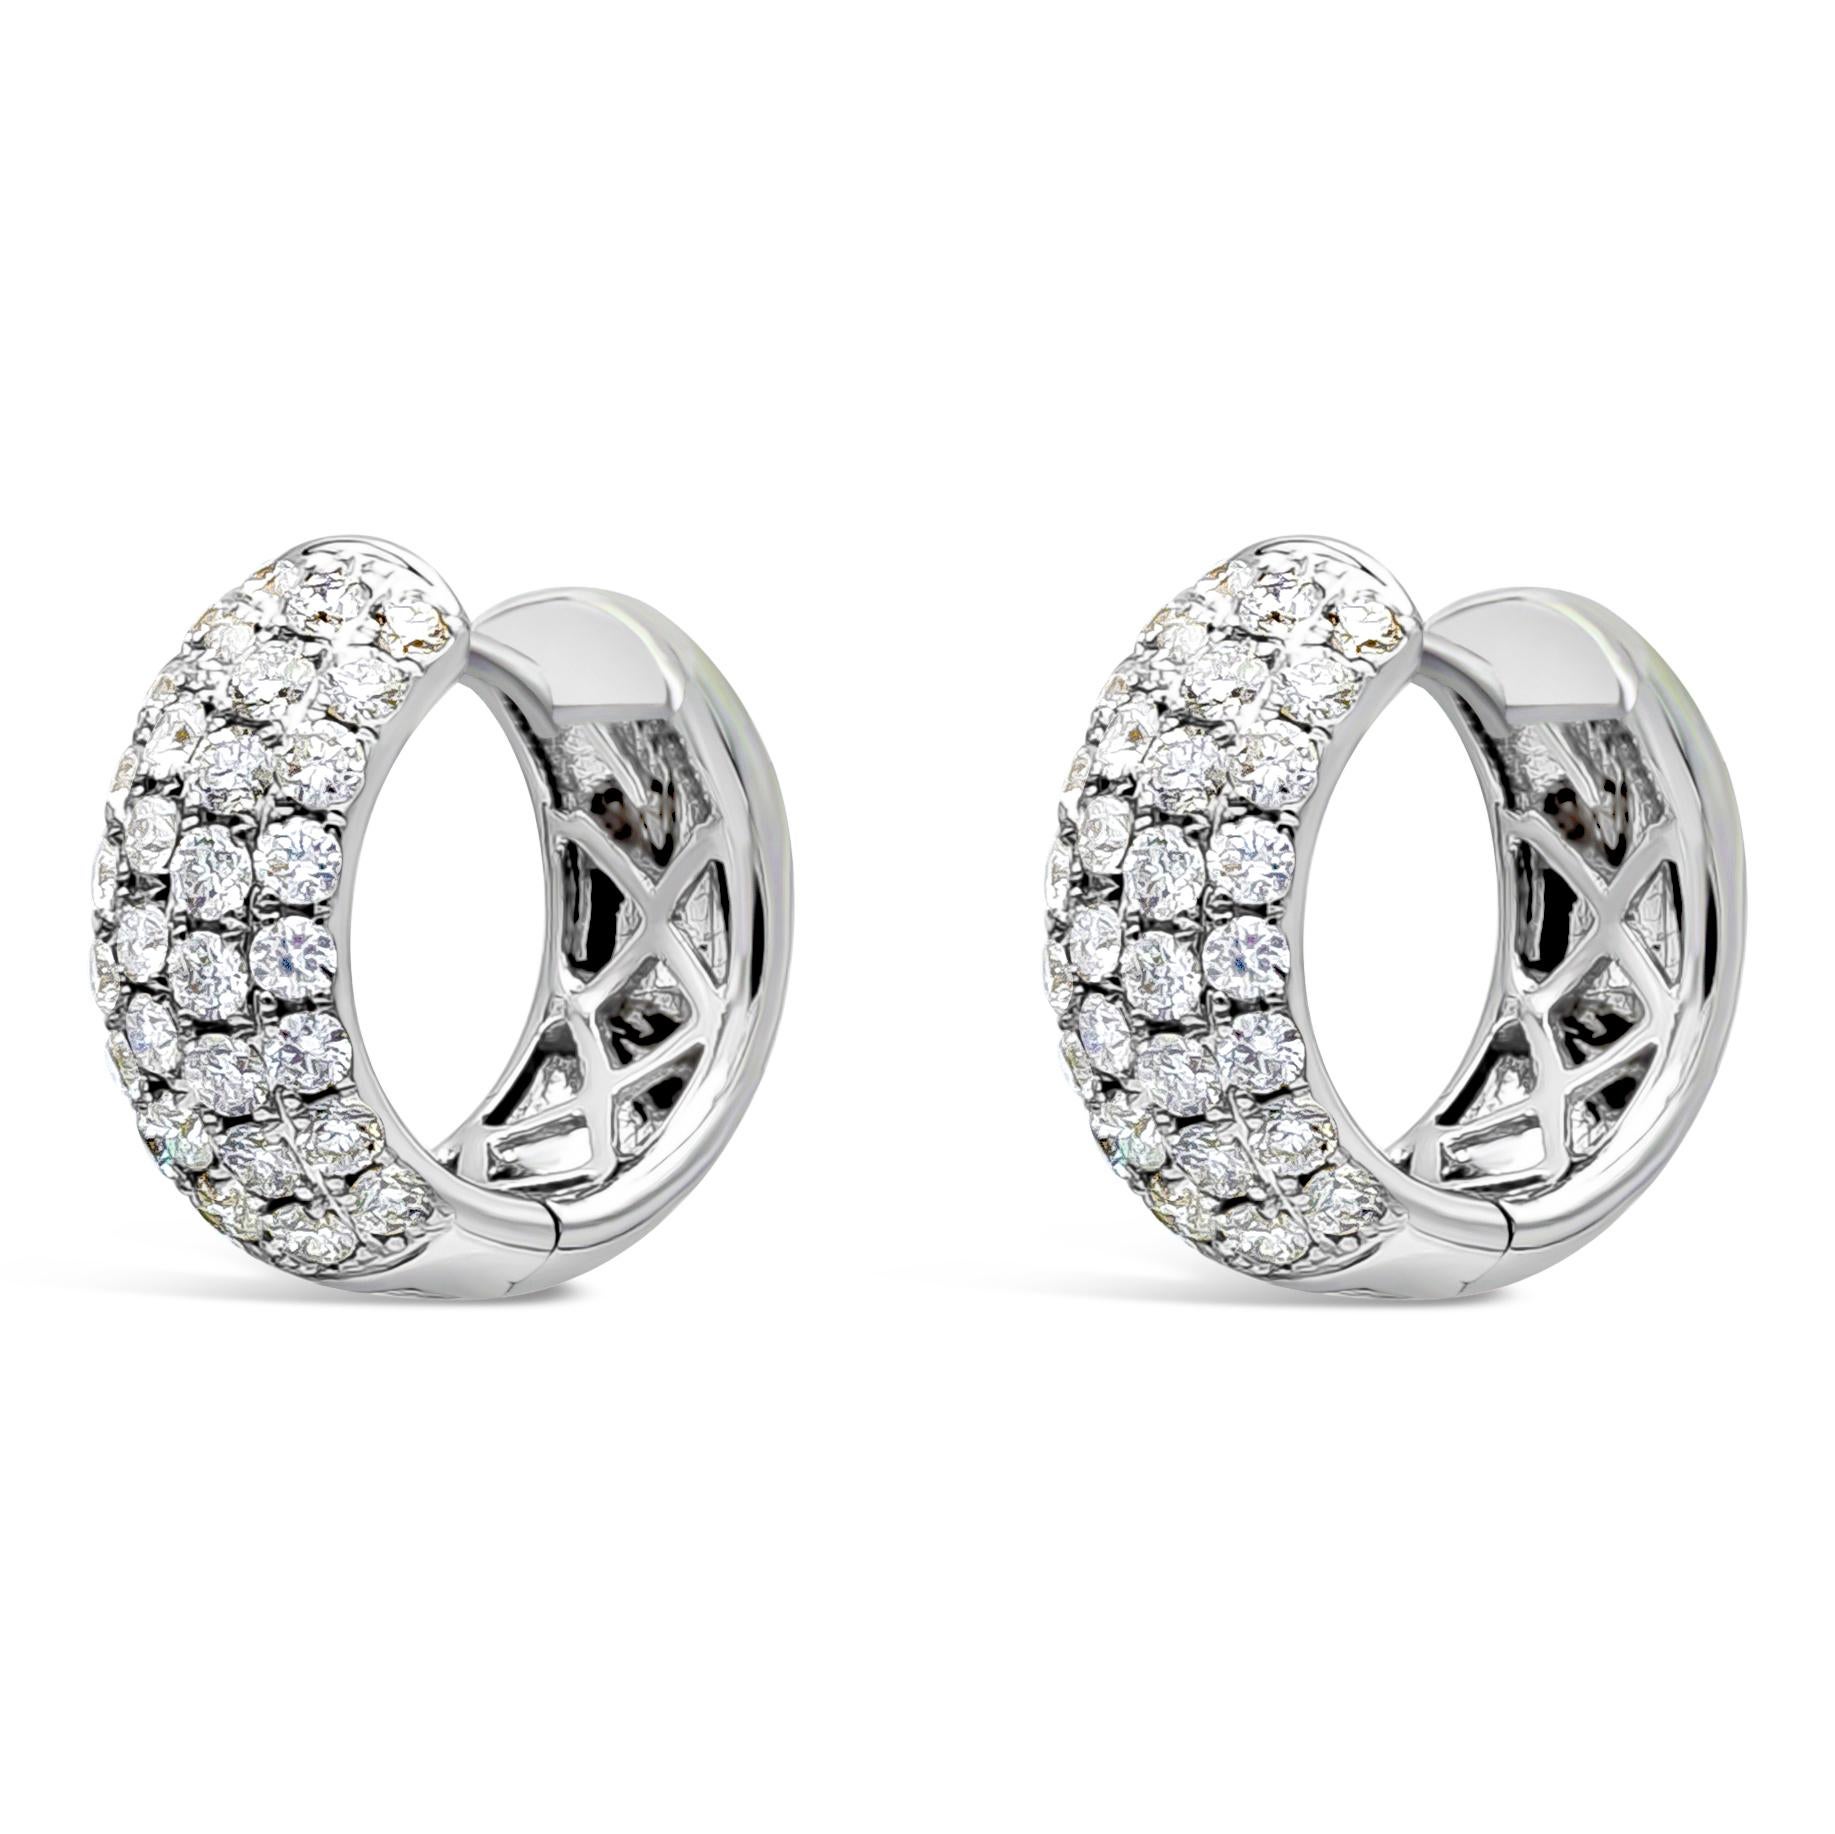 A simple chic rounded huggie hoop earrings showcasing 64 pieces round diamond weighing 1.23 carat total, F Color and VS in Clarity. Pave style setting. Made with 18K White Gold. 

Roman Malakov is a custom house, specializing in creating anything